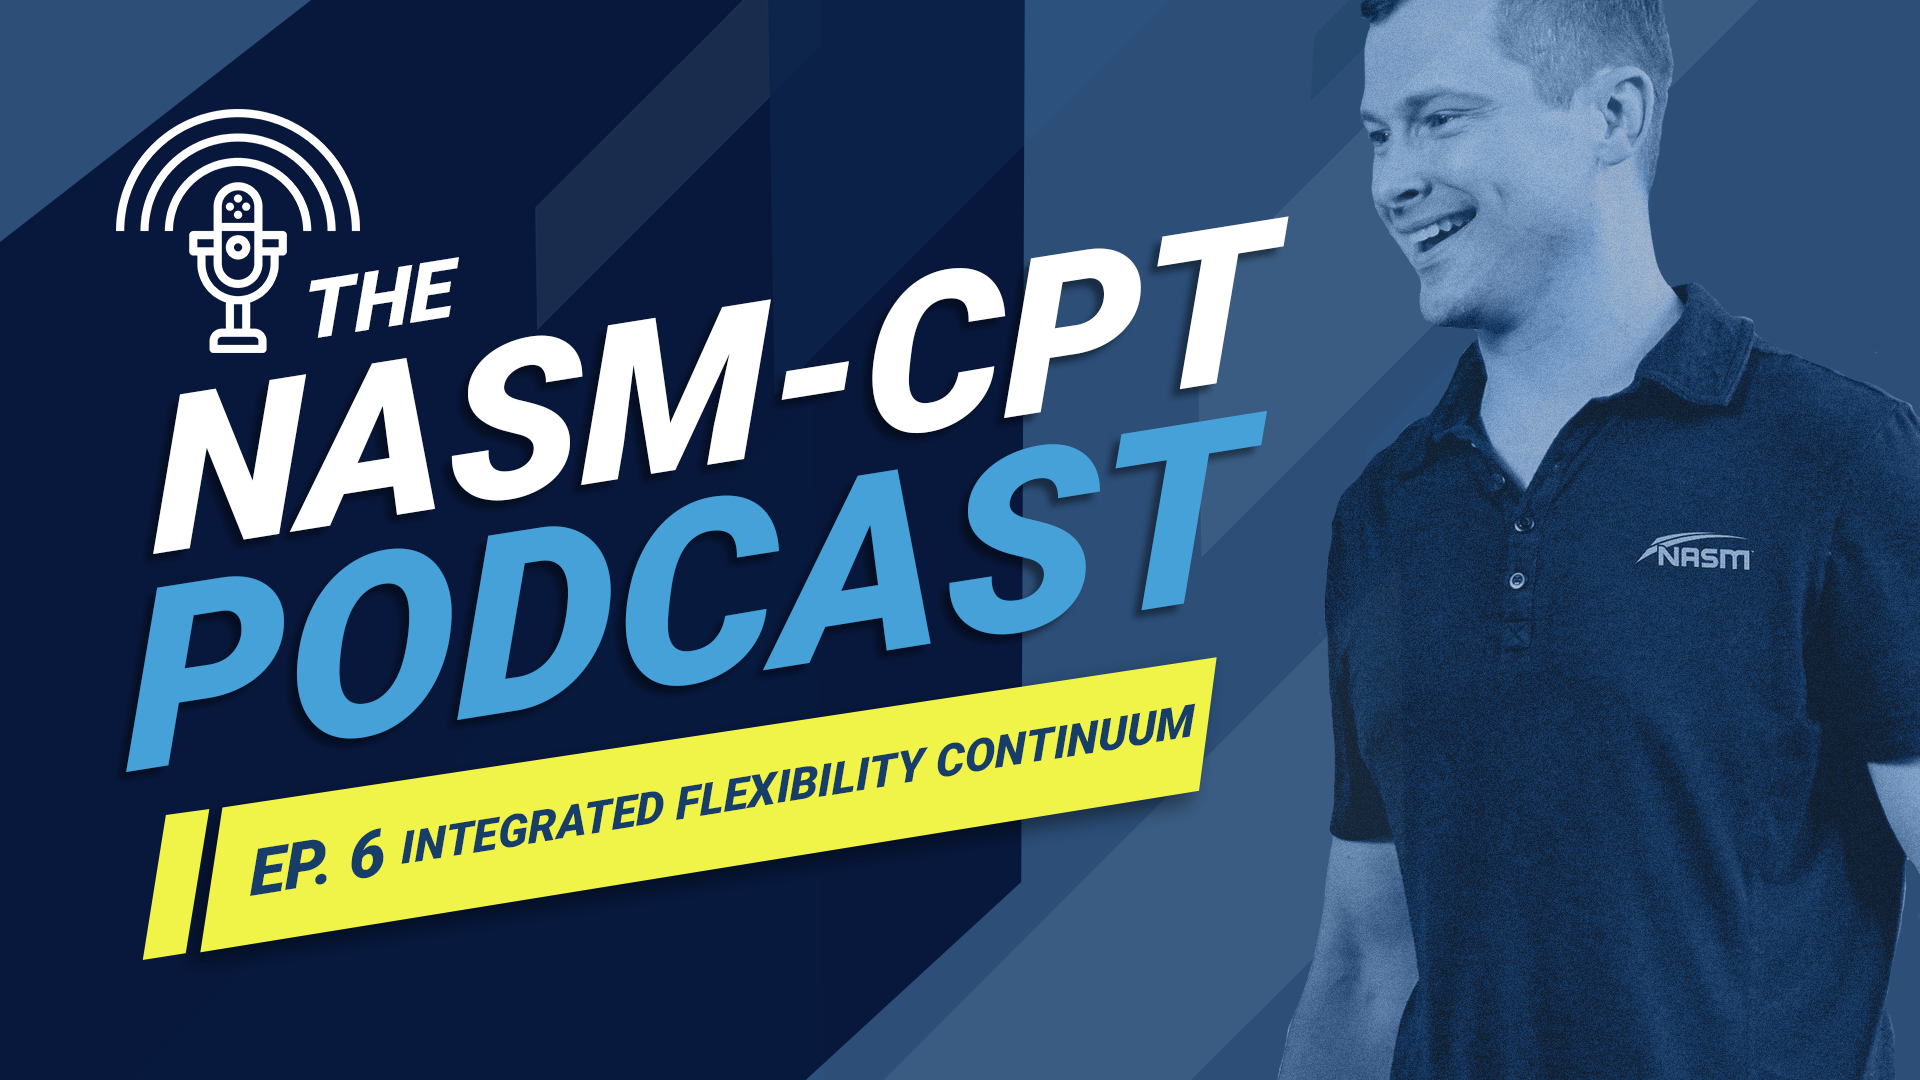 The NASM-CPT Podcast Ep. 6 Integrated Flexibility Continuum